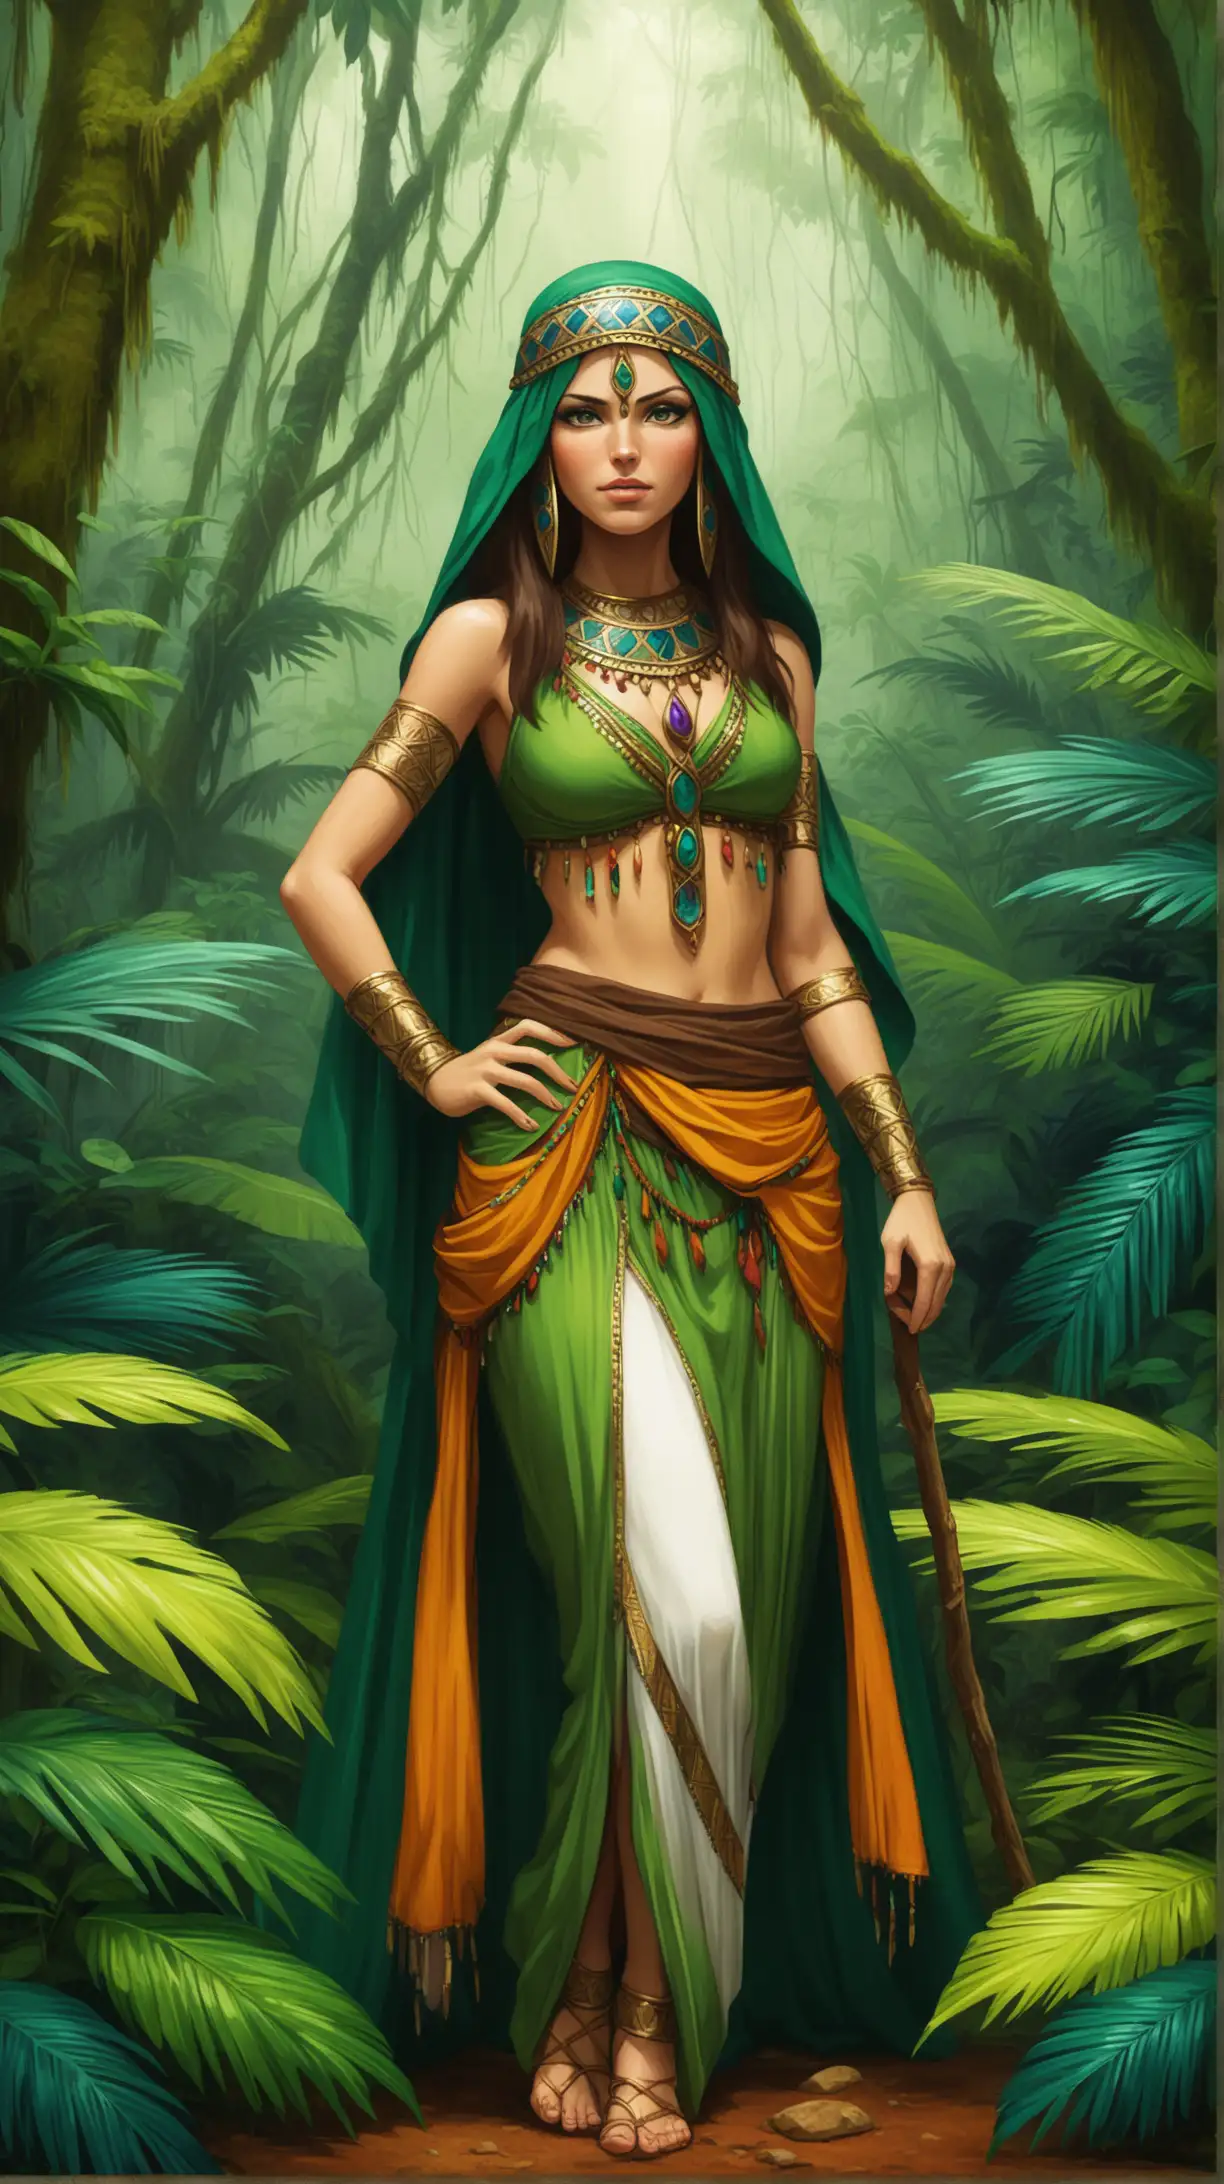 rainforest huntress wearing Middle Eastern clothing